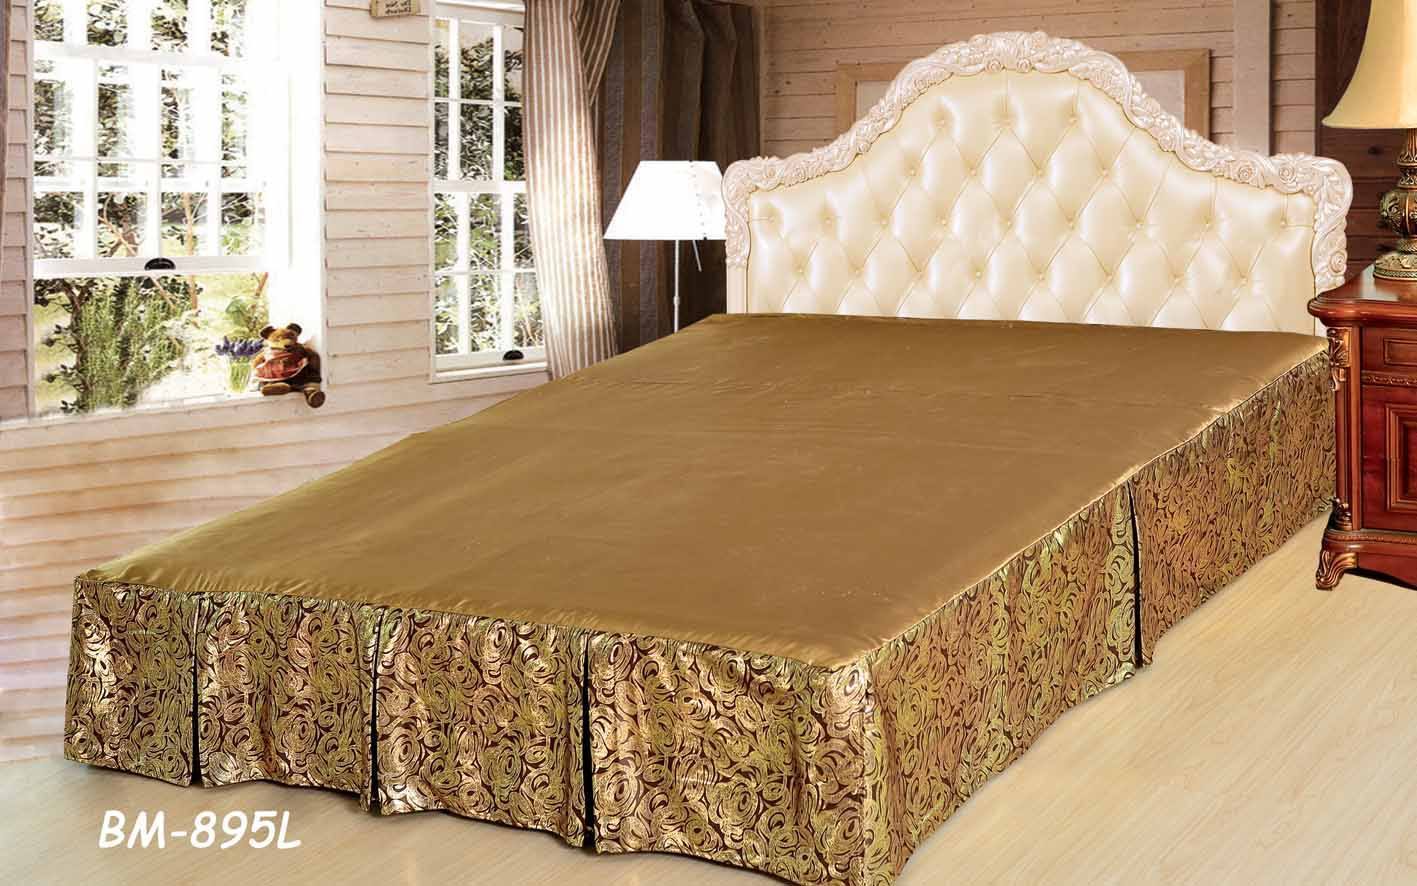 Tache Elegant Autumn Falls Melted Gold Brown Swirl Pleated Tailored Platform 14" Bed Skirt Dust Ruffle (BSK-895L) - Tache Home Fashion